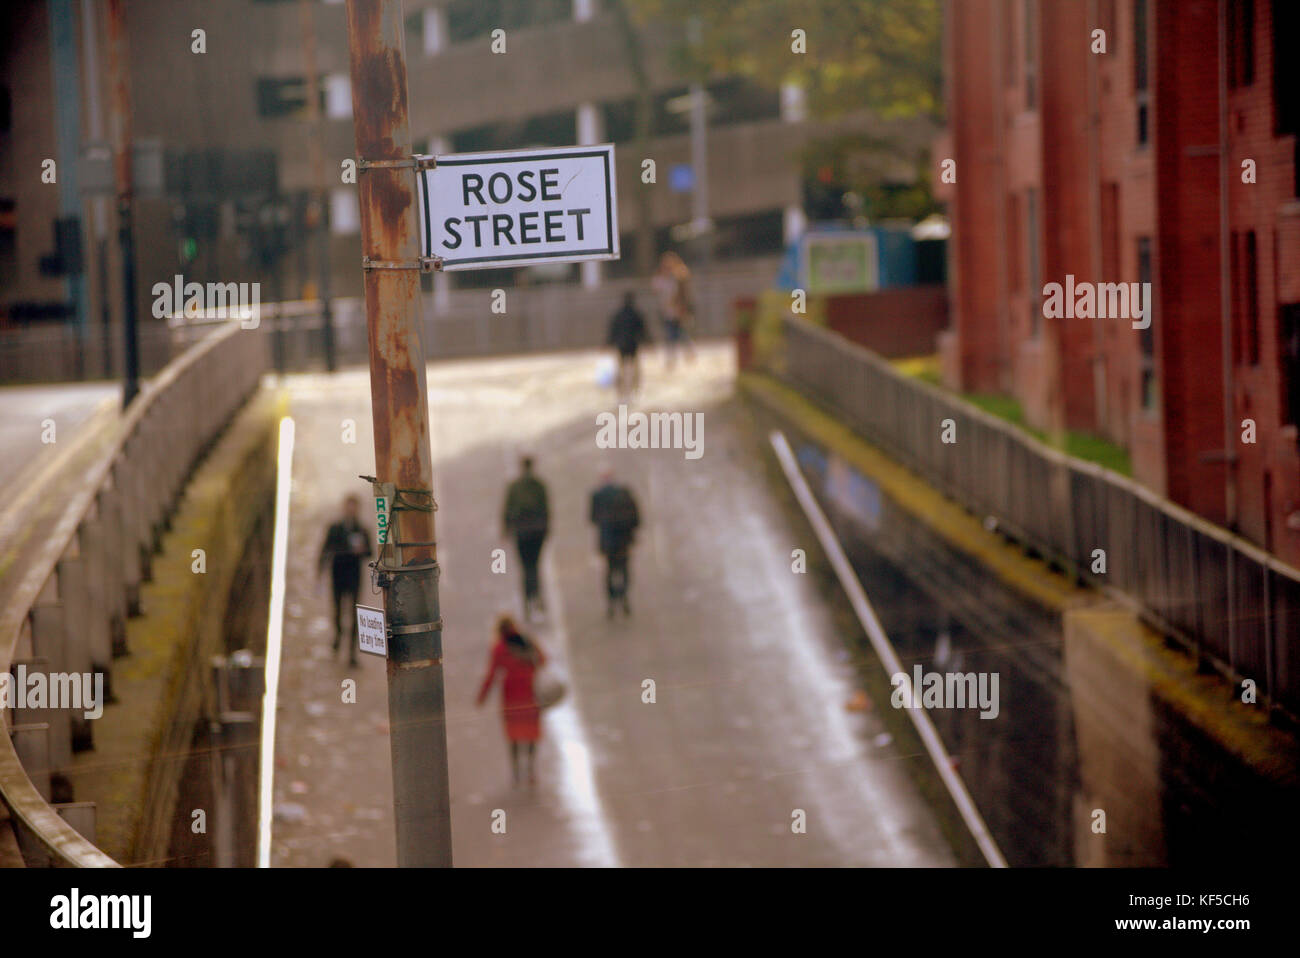 rose street glasgow sign street scene from high viewpoint out of focus figures people men and women Stock Photo